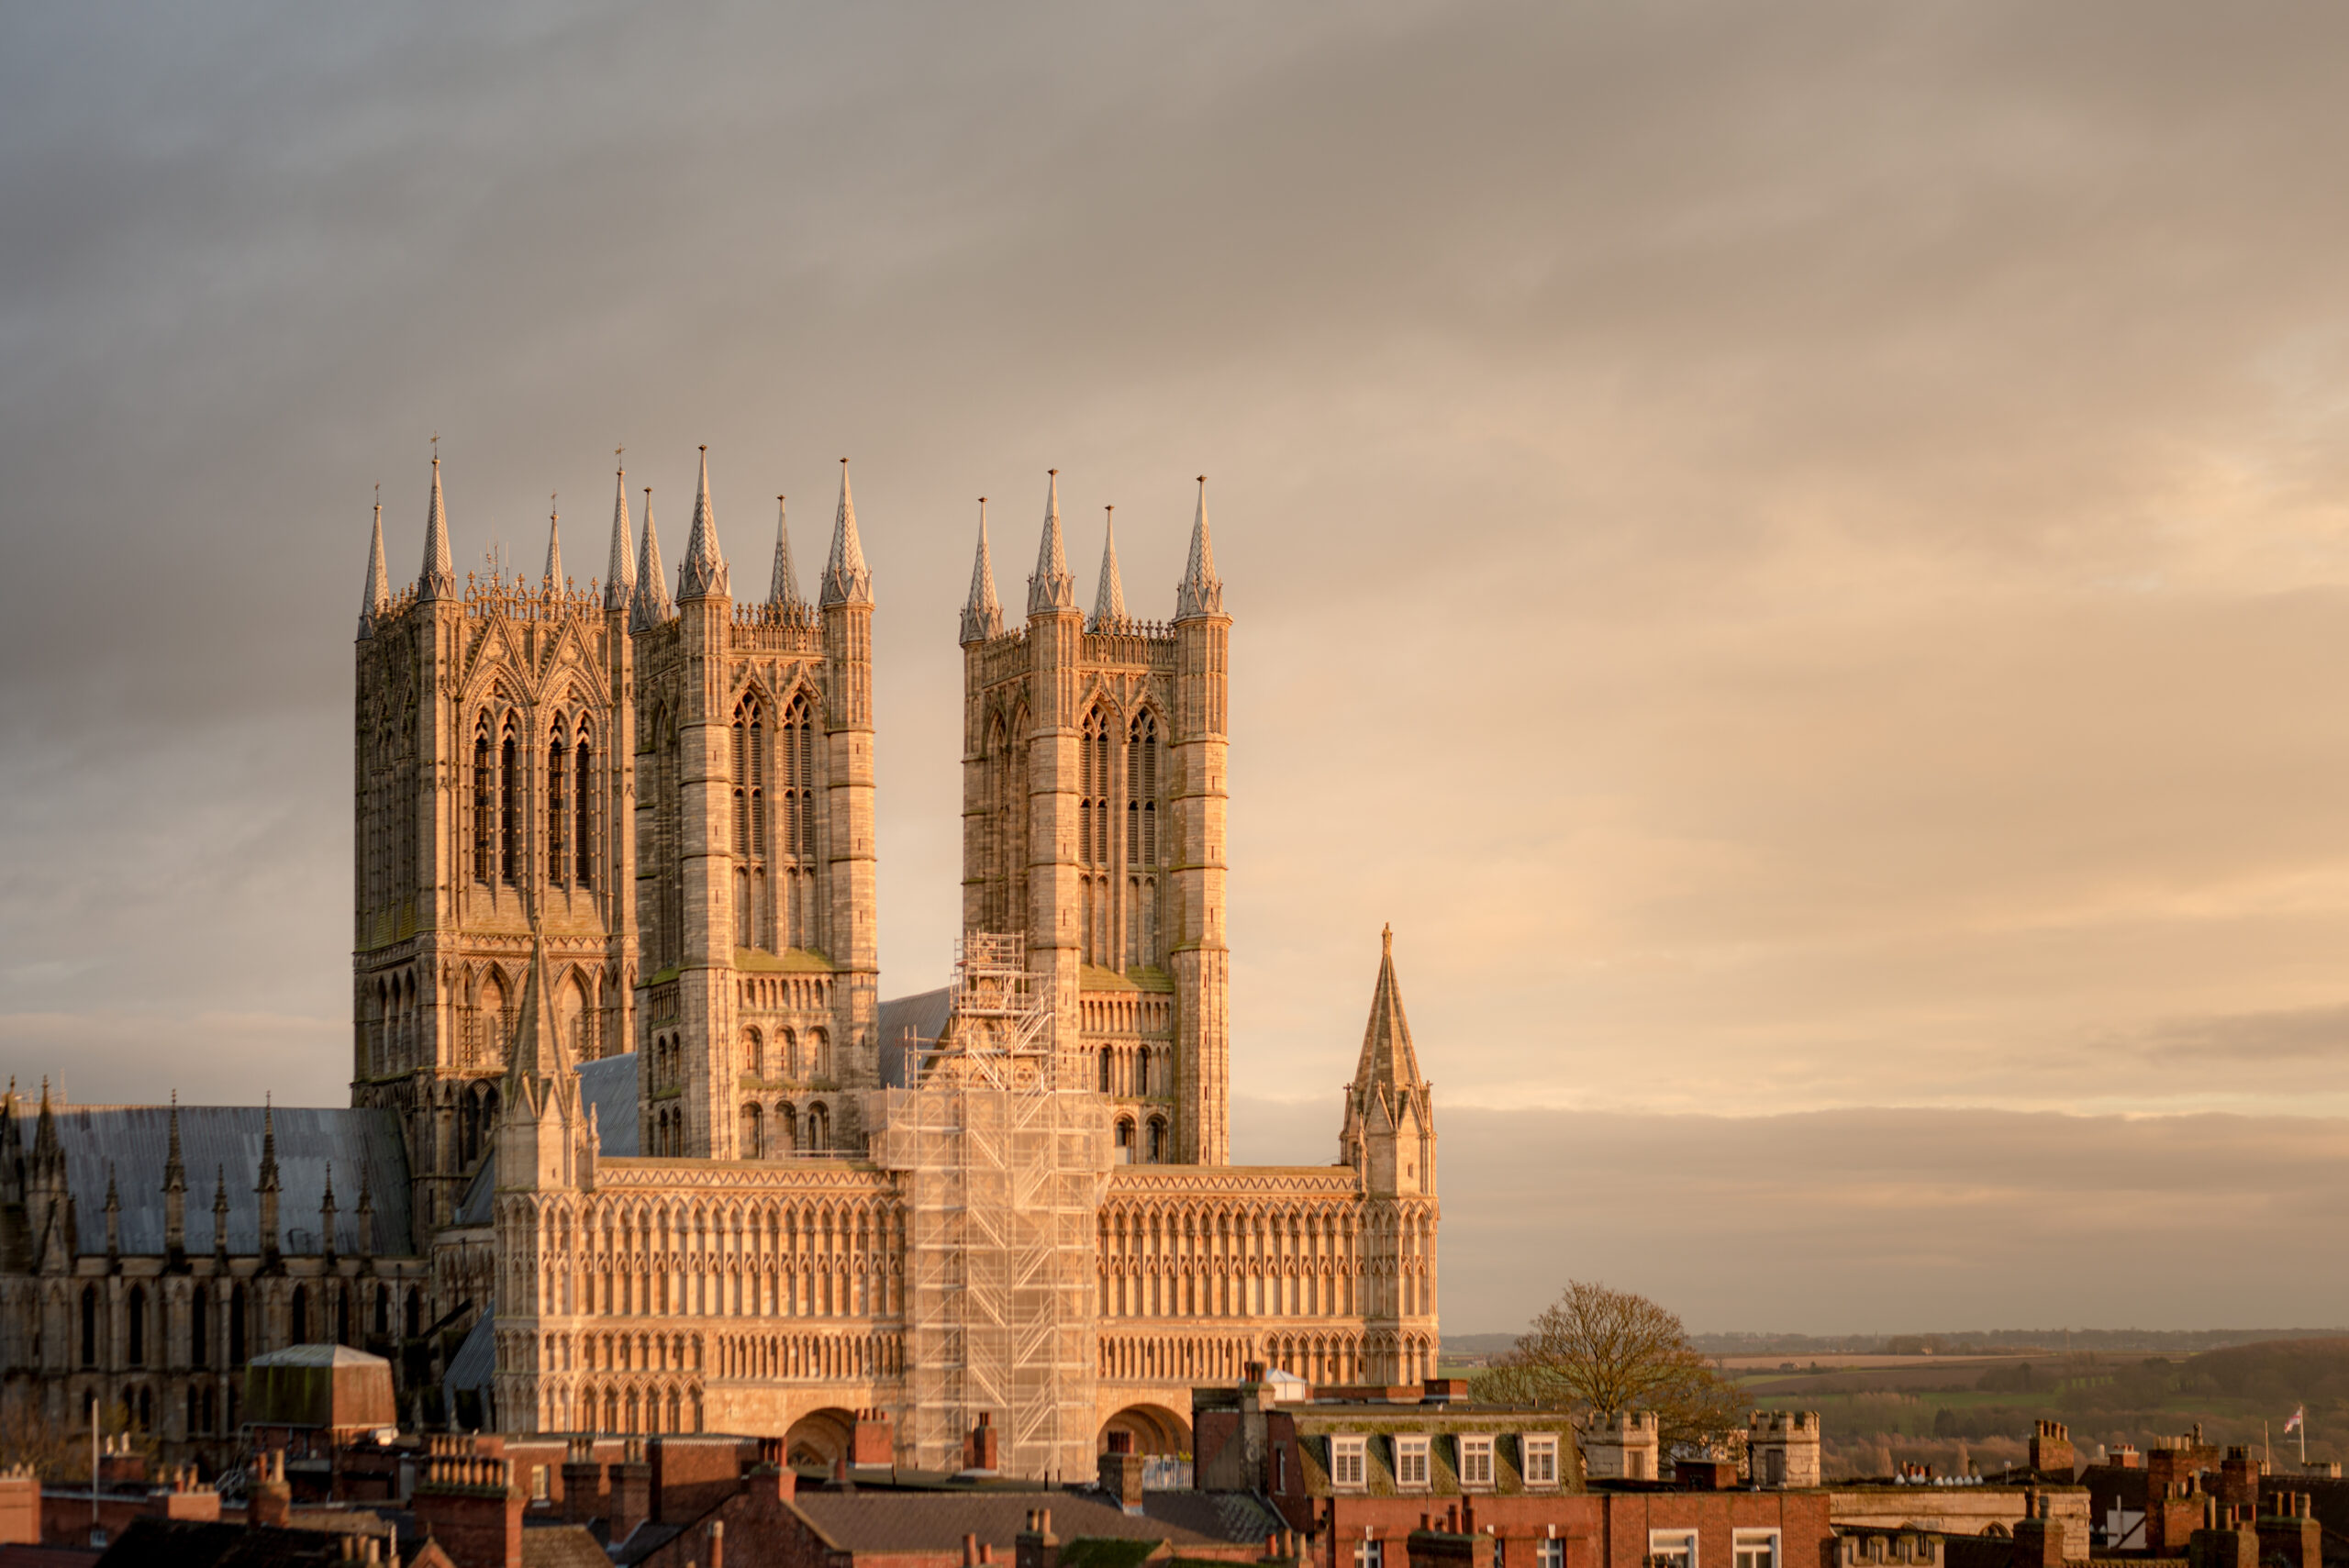 Image of Lincoln Cathedral where we do Pat Testing